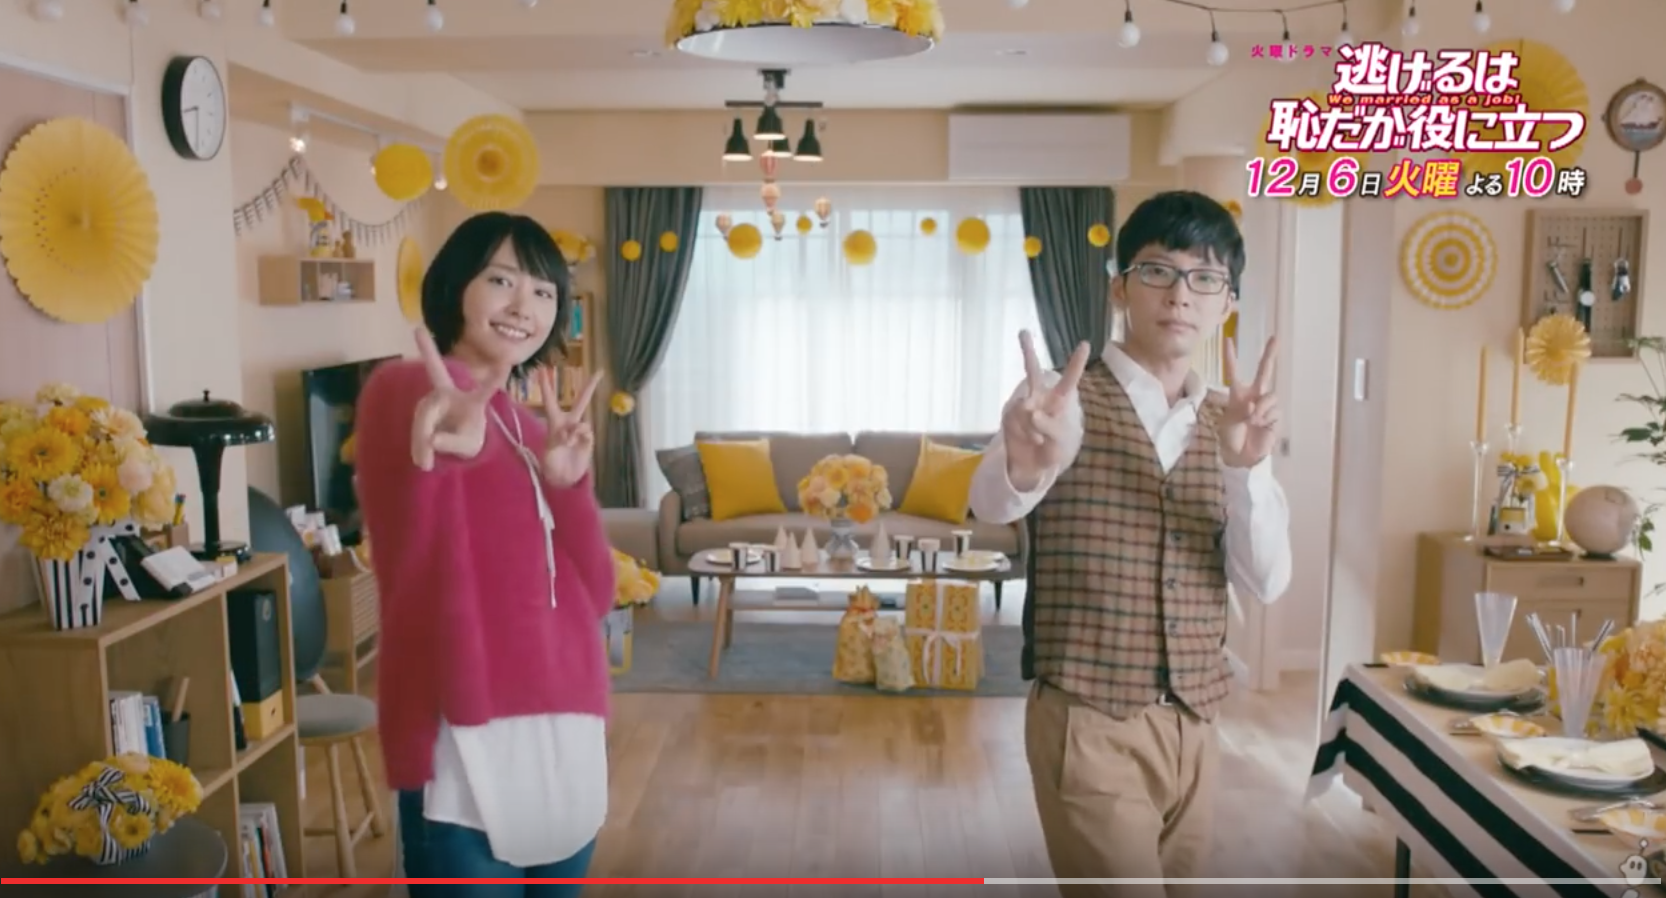 New “Love Dance” takes Japan by storm, thanks to a Japanese drama and a  handsome J-Pop star | SoraNews24 -Japan News-